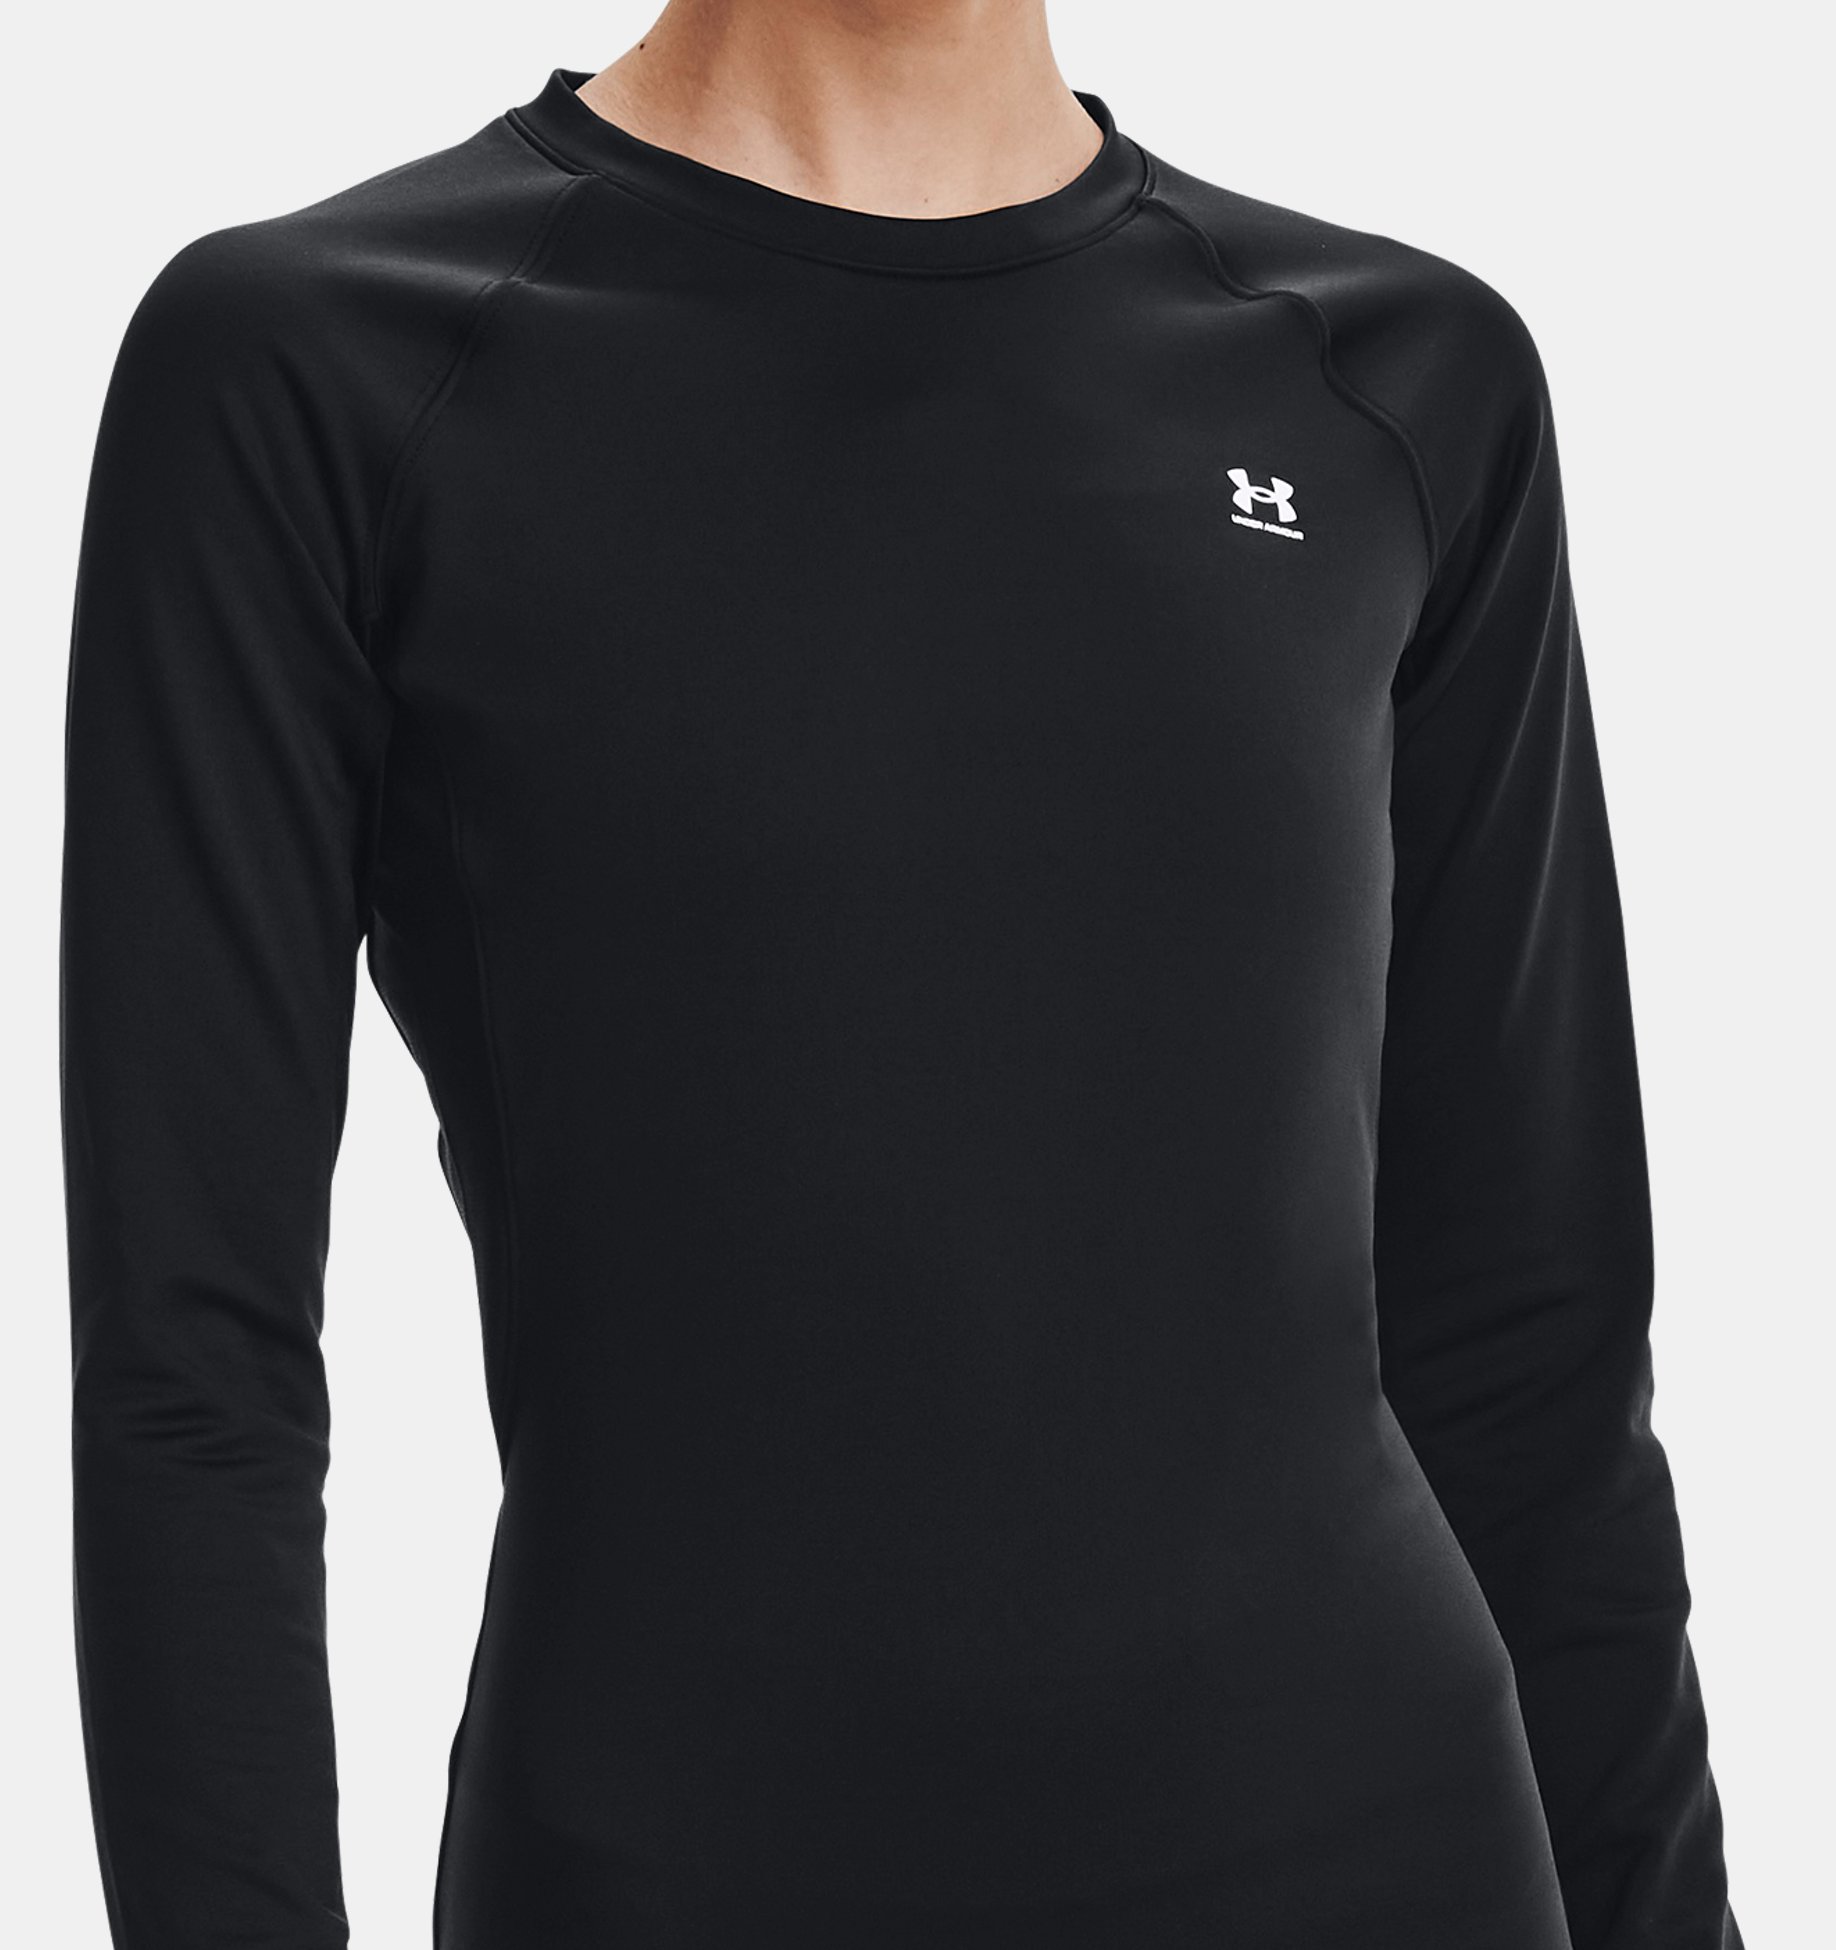 https://underarmour.scene7.com/is/image/Underarmour/V5-1368701-001_FC?rp=standard-0pad|pdpZoomDesktop&scl=0.72&fmt=jpg&qlt=85&resMode=sharp2&cache=on,on&bgc=f0f0f0&wid=1836&hei=1950&size=1500,1500